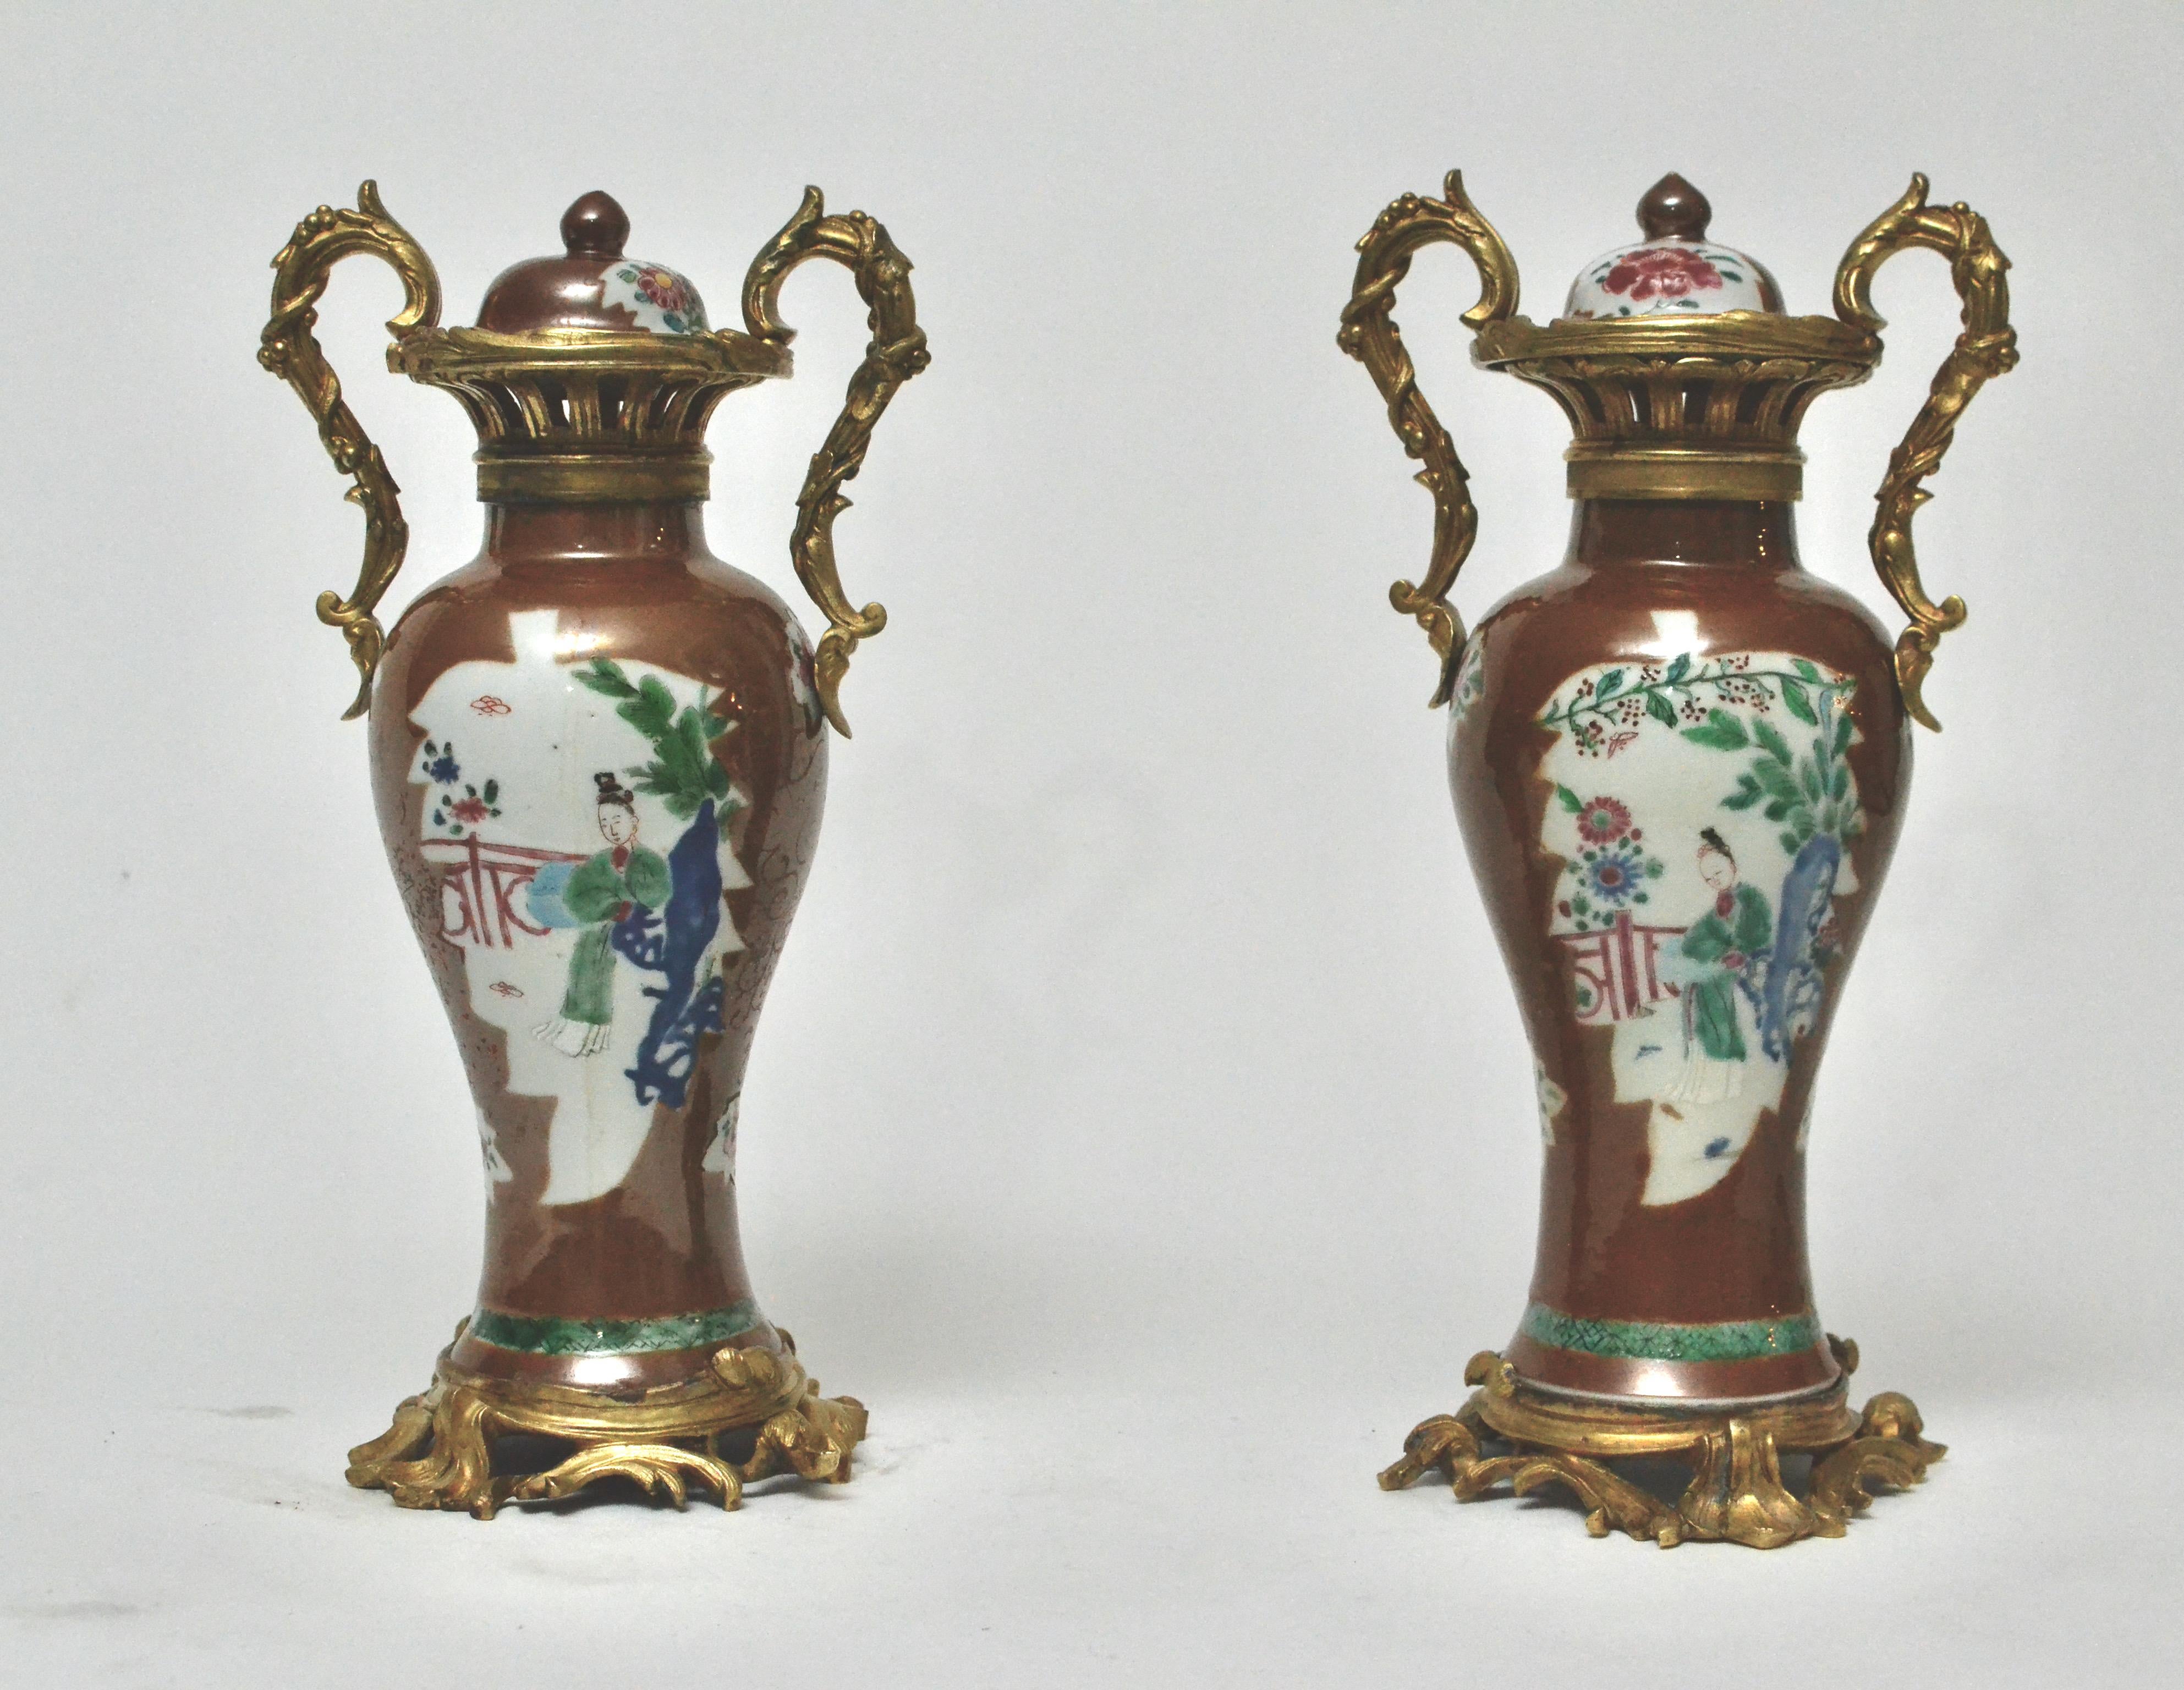 Chinese Export Pair of Chinese Ormolu Mounted Porcelain Vases, 18th Century